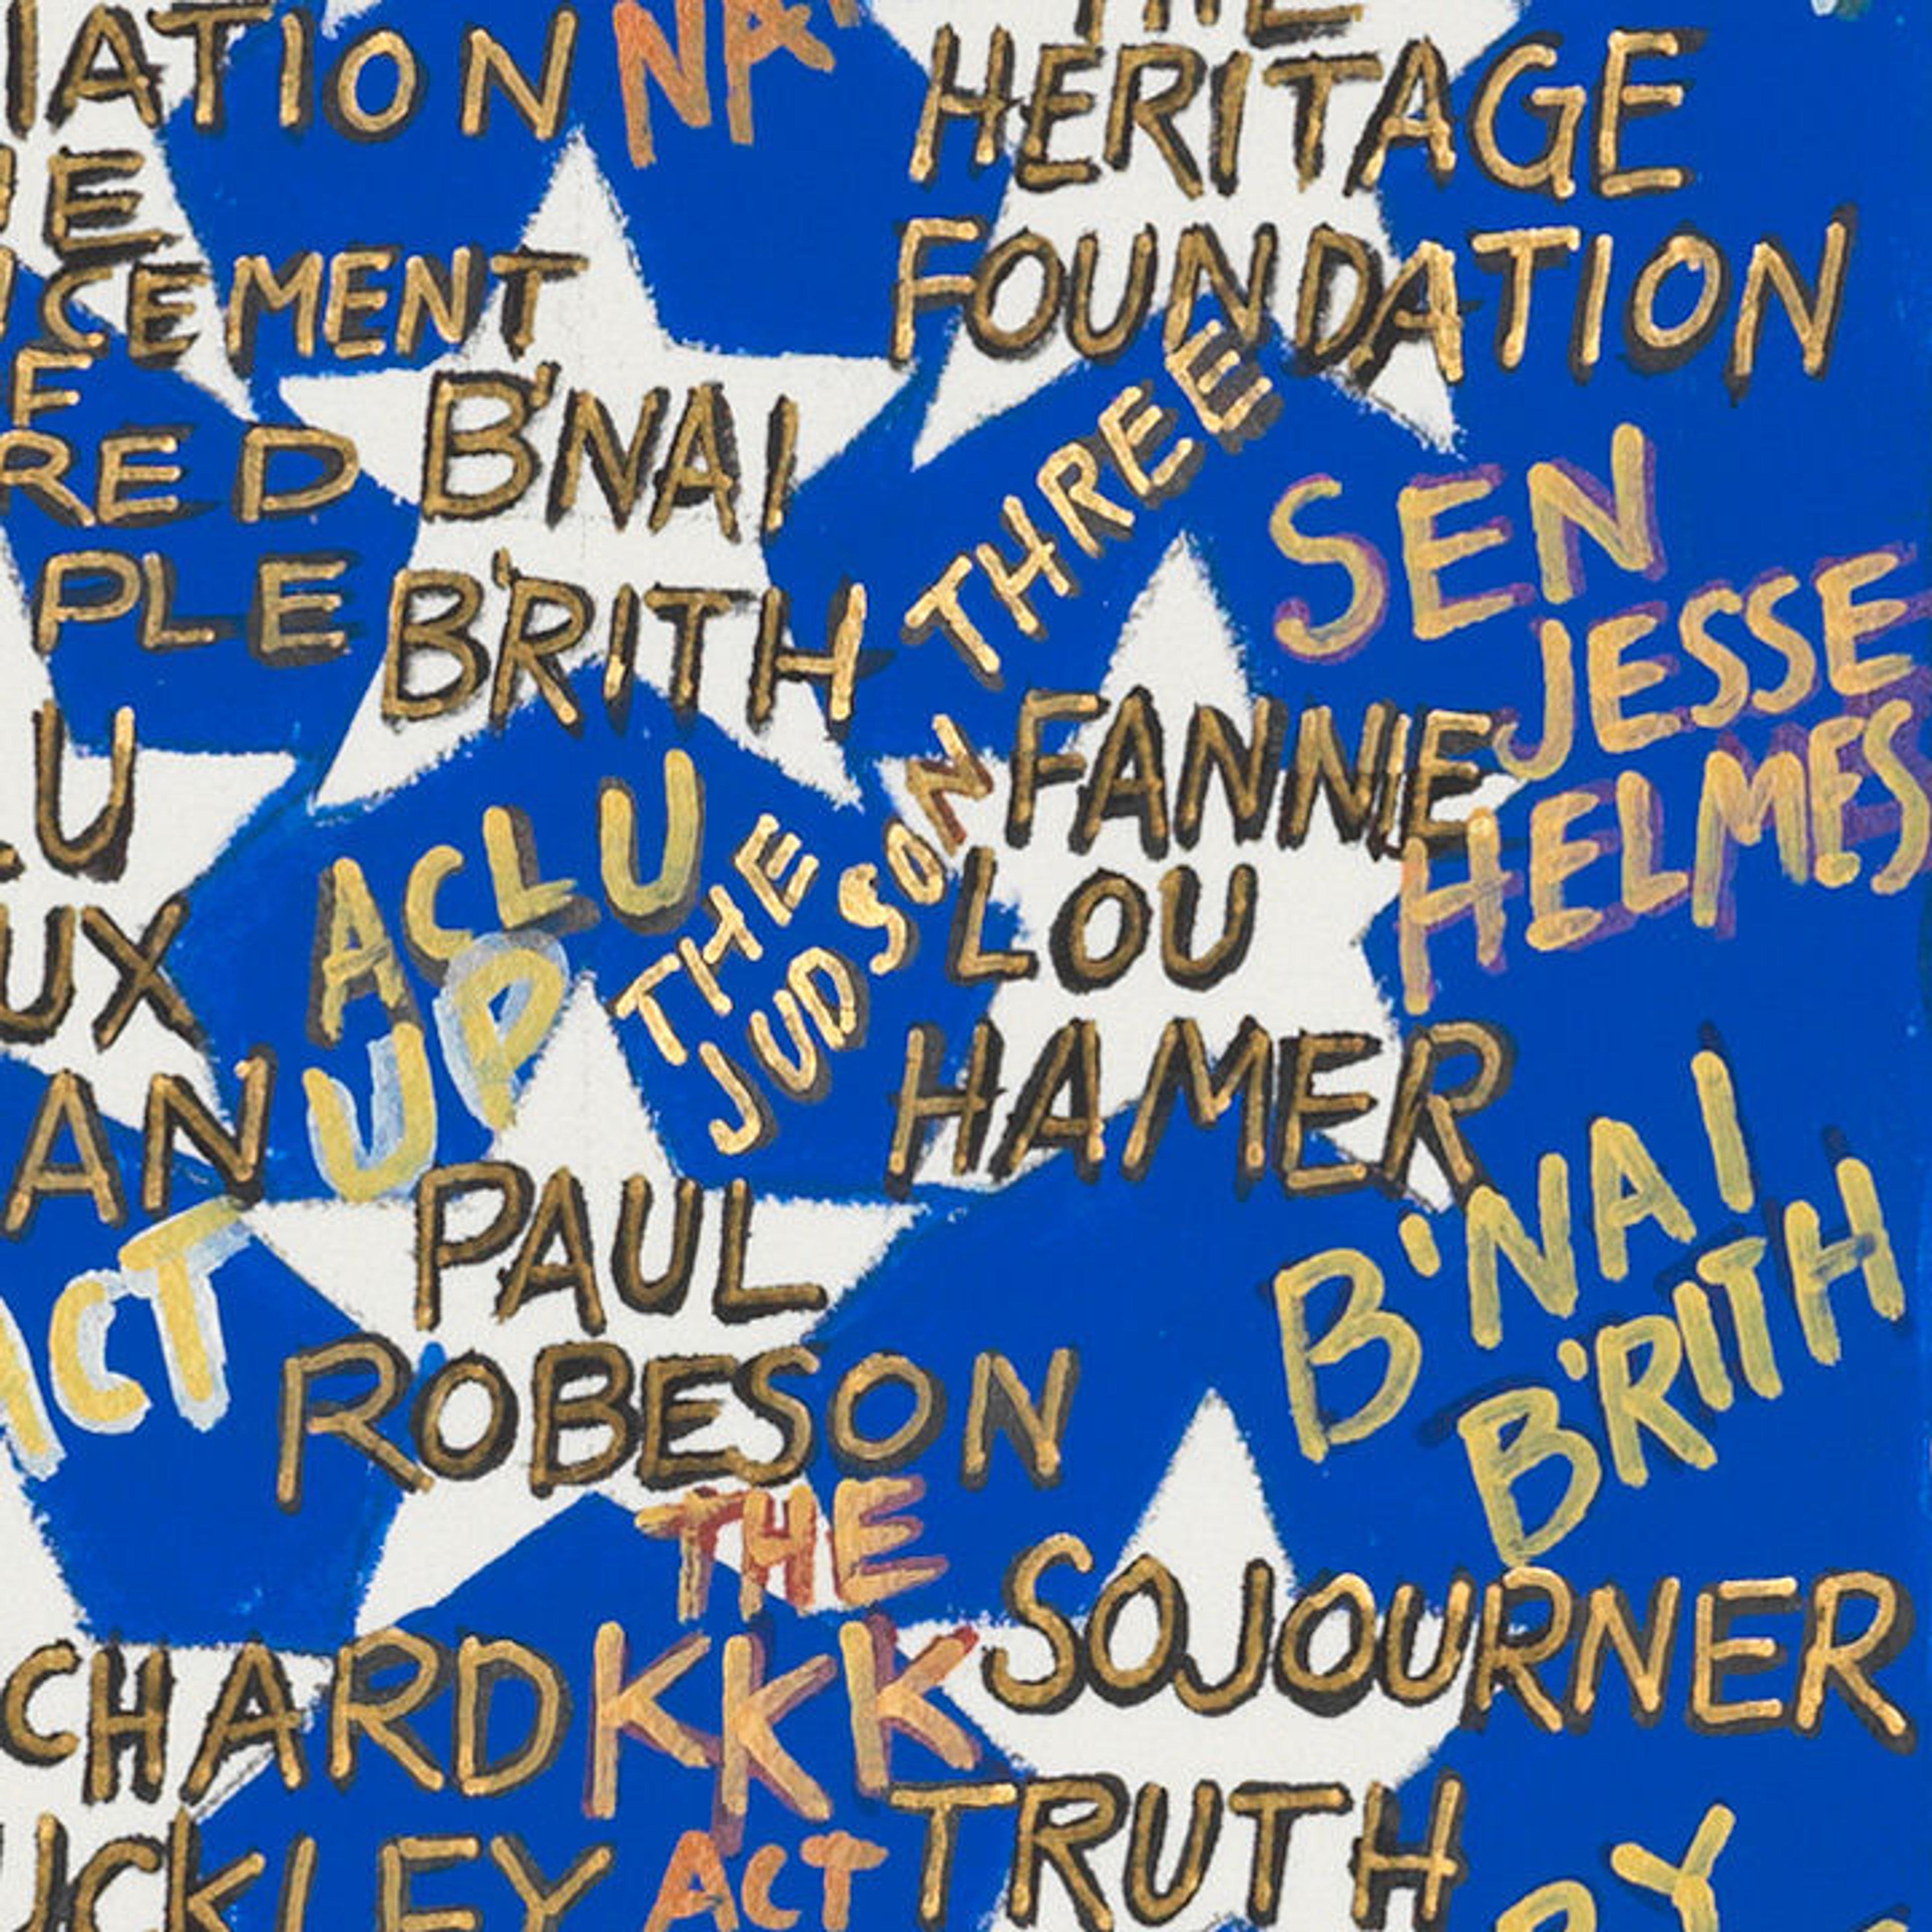 Names of people such as Fannie Lou Hamer and Paul Robeson are painted in shades of yellow and gold over white stars in Faith Ringgold's painting of the American flag